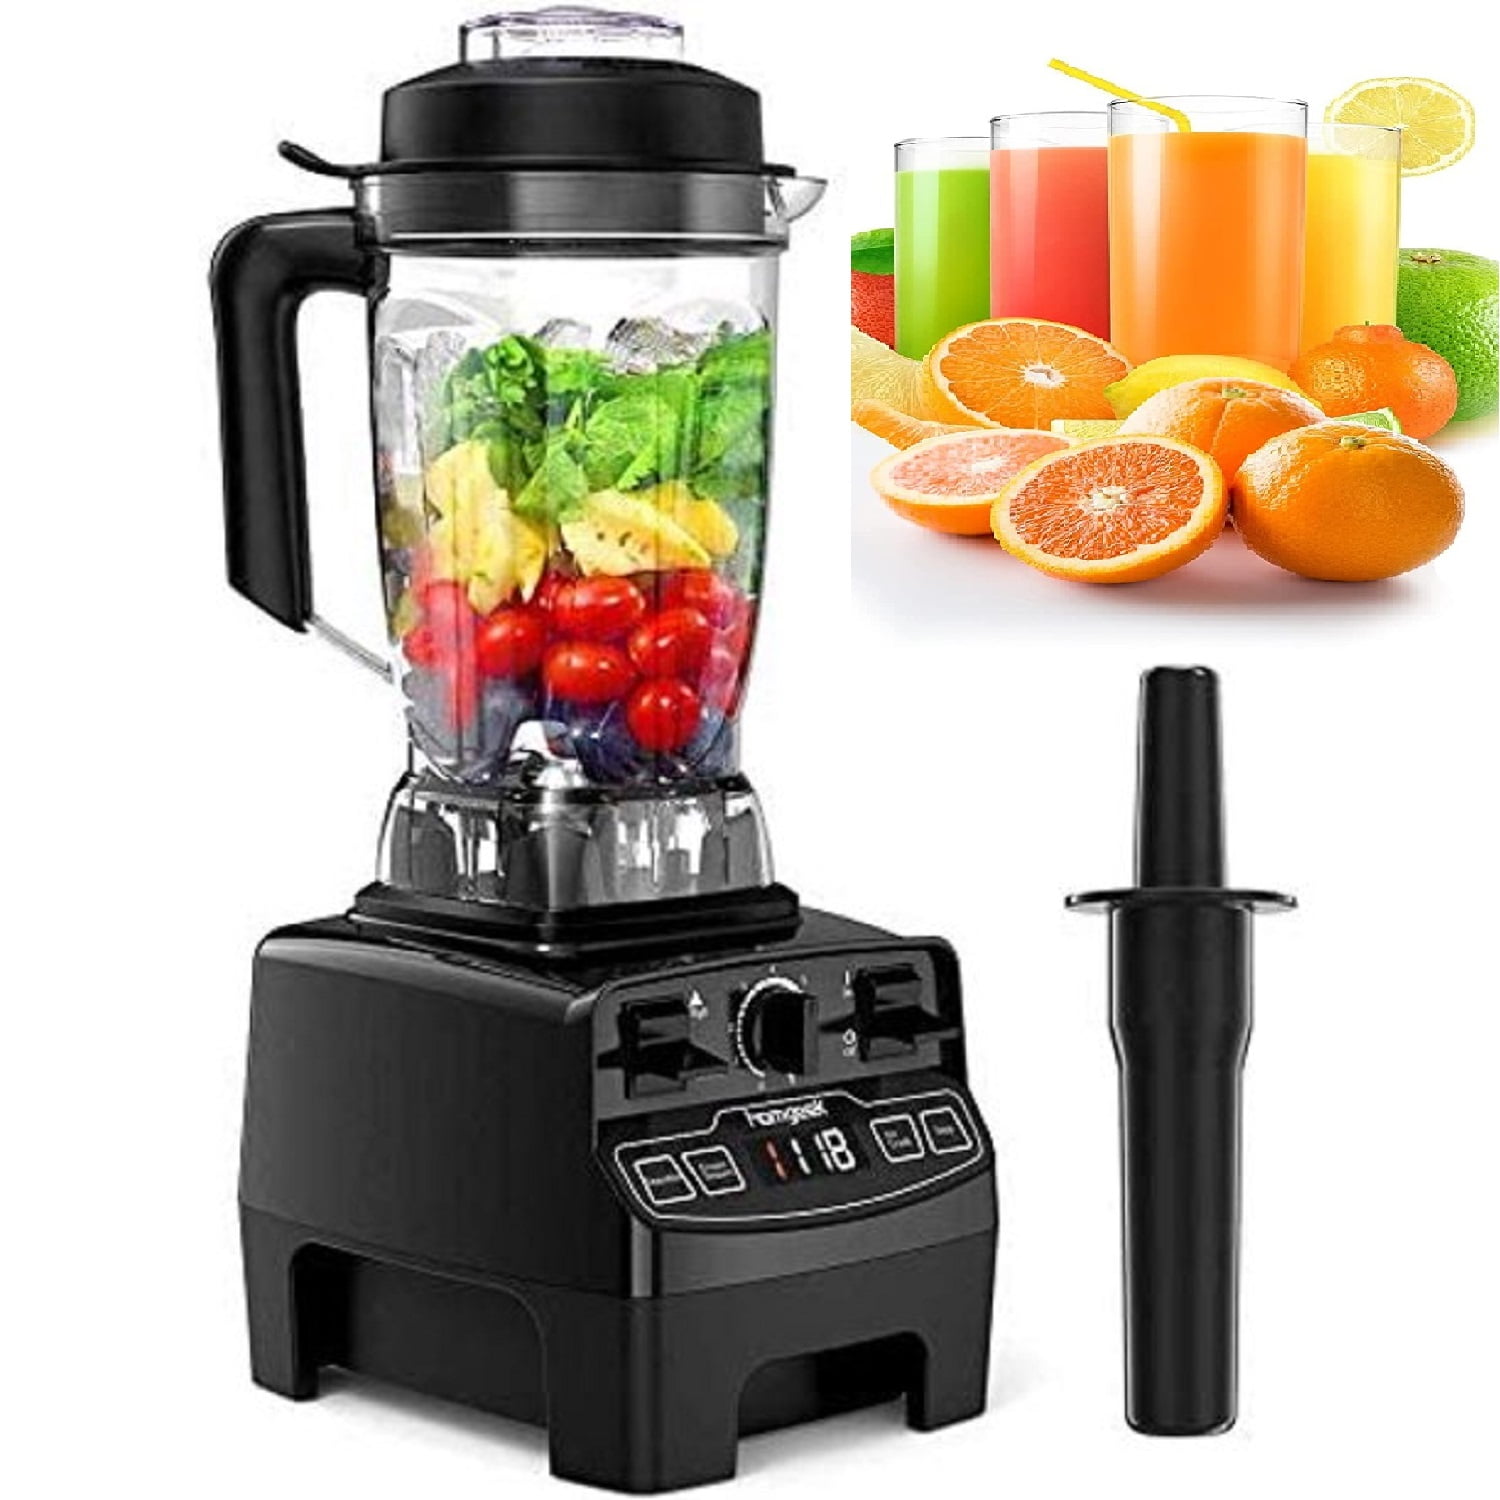  Enfmay Smoothie Blender Maker 1450W High Performance Blender  for Kitchen with 4 Preset Programs 8 Speeds Control 33000RPM Powerful  Blender 2L Tritan BPA Free Container Ice Crush Blender for Smoothie: Home